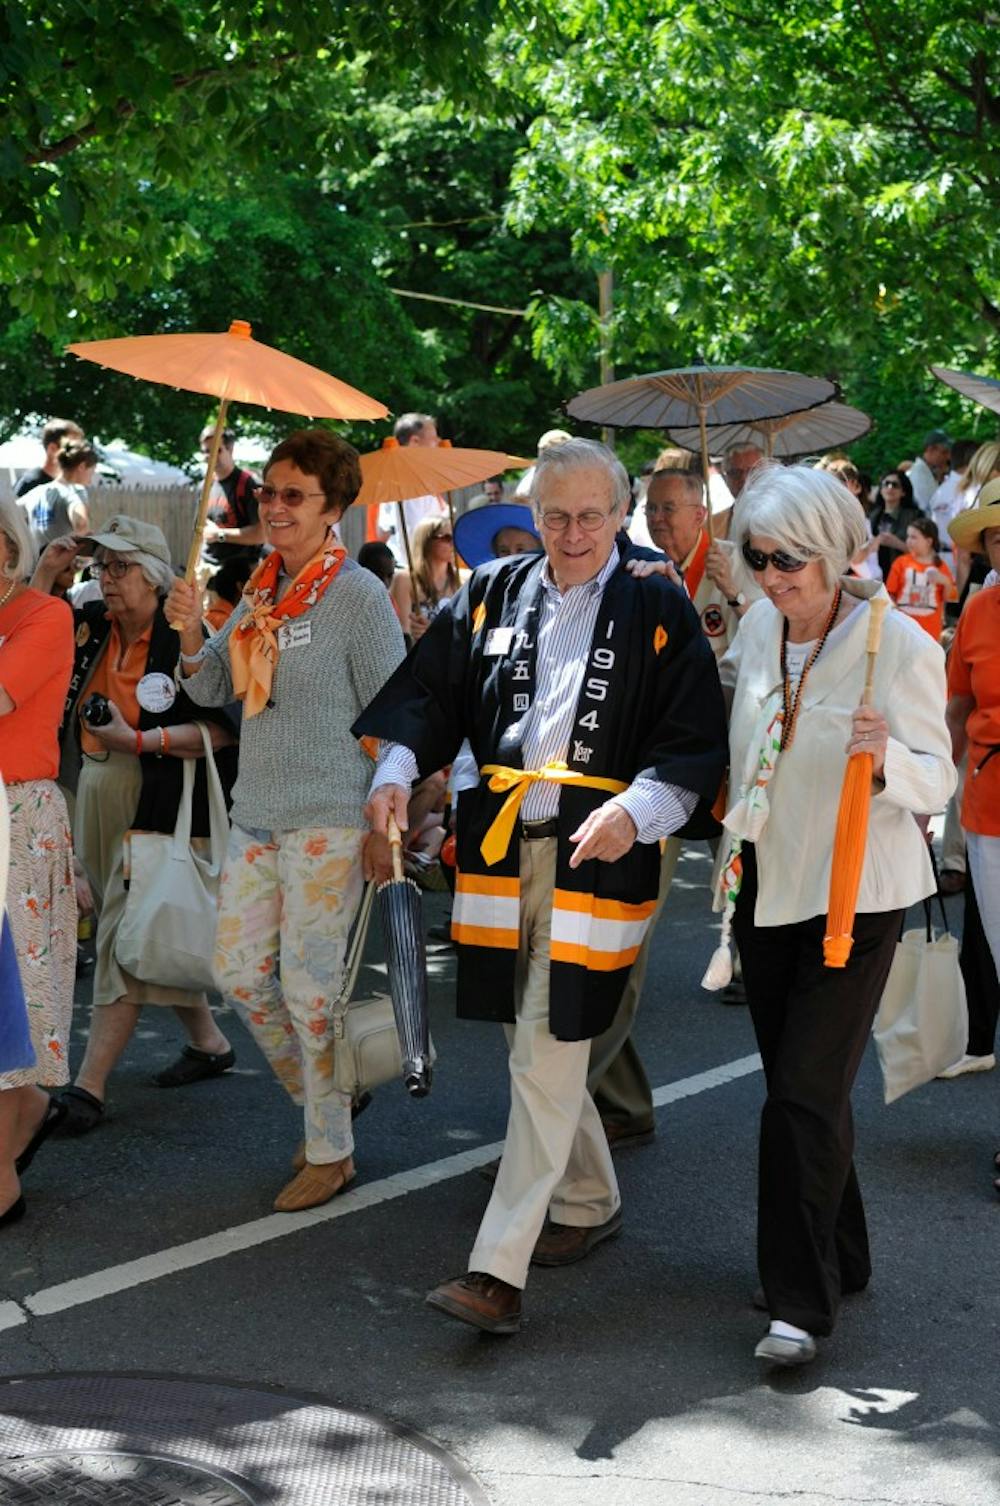 &nbsp;Donald Rumsfeld '54 marched in the P-rade for his 60th reunion in 2014.
Photo Credit: Ben Koger for The Daily Princetonian